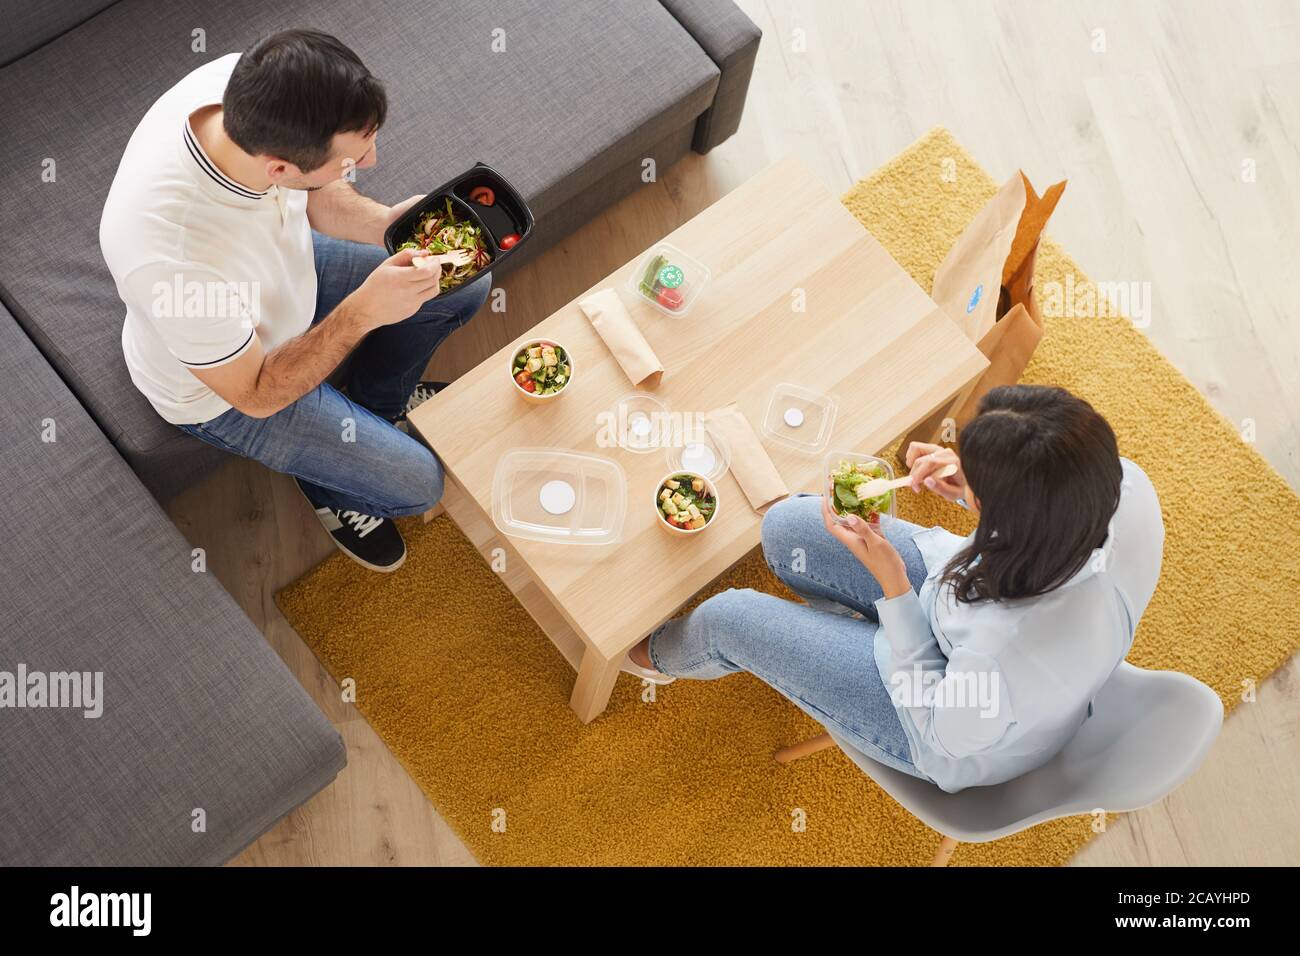 Above view portrait of man and woman eating takeout lunch in office or at home while sitting on big couch, copy space Stock Photo